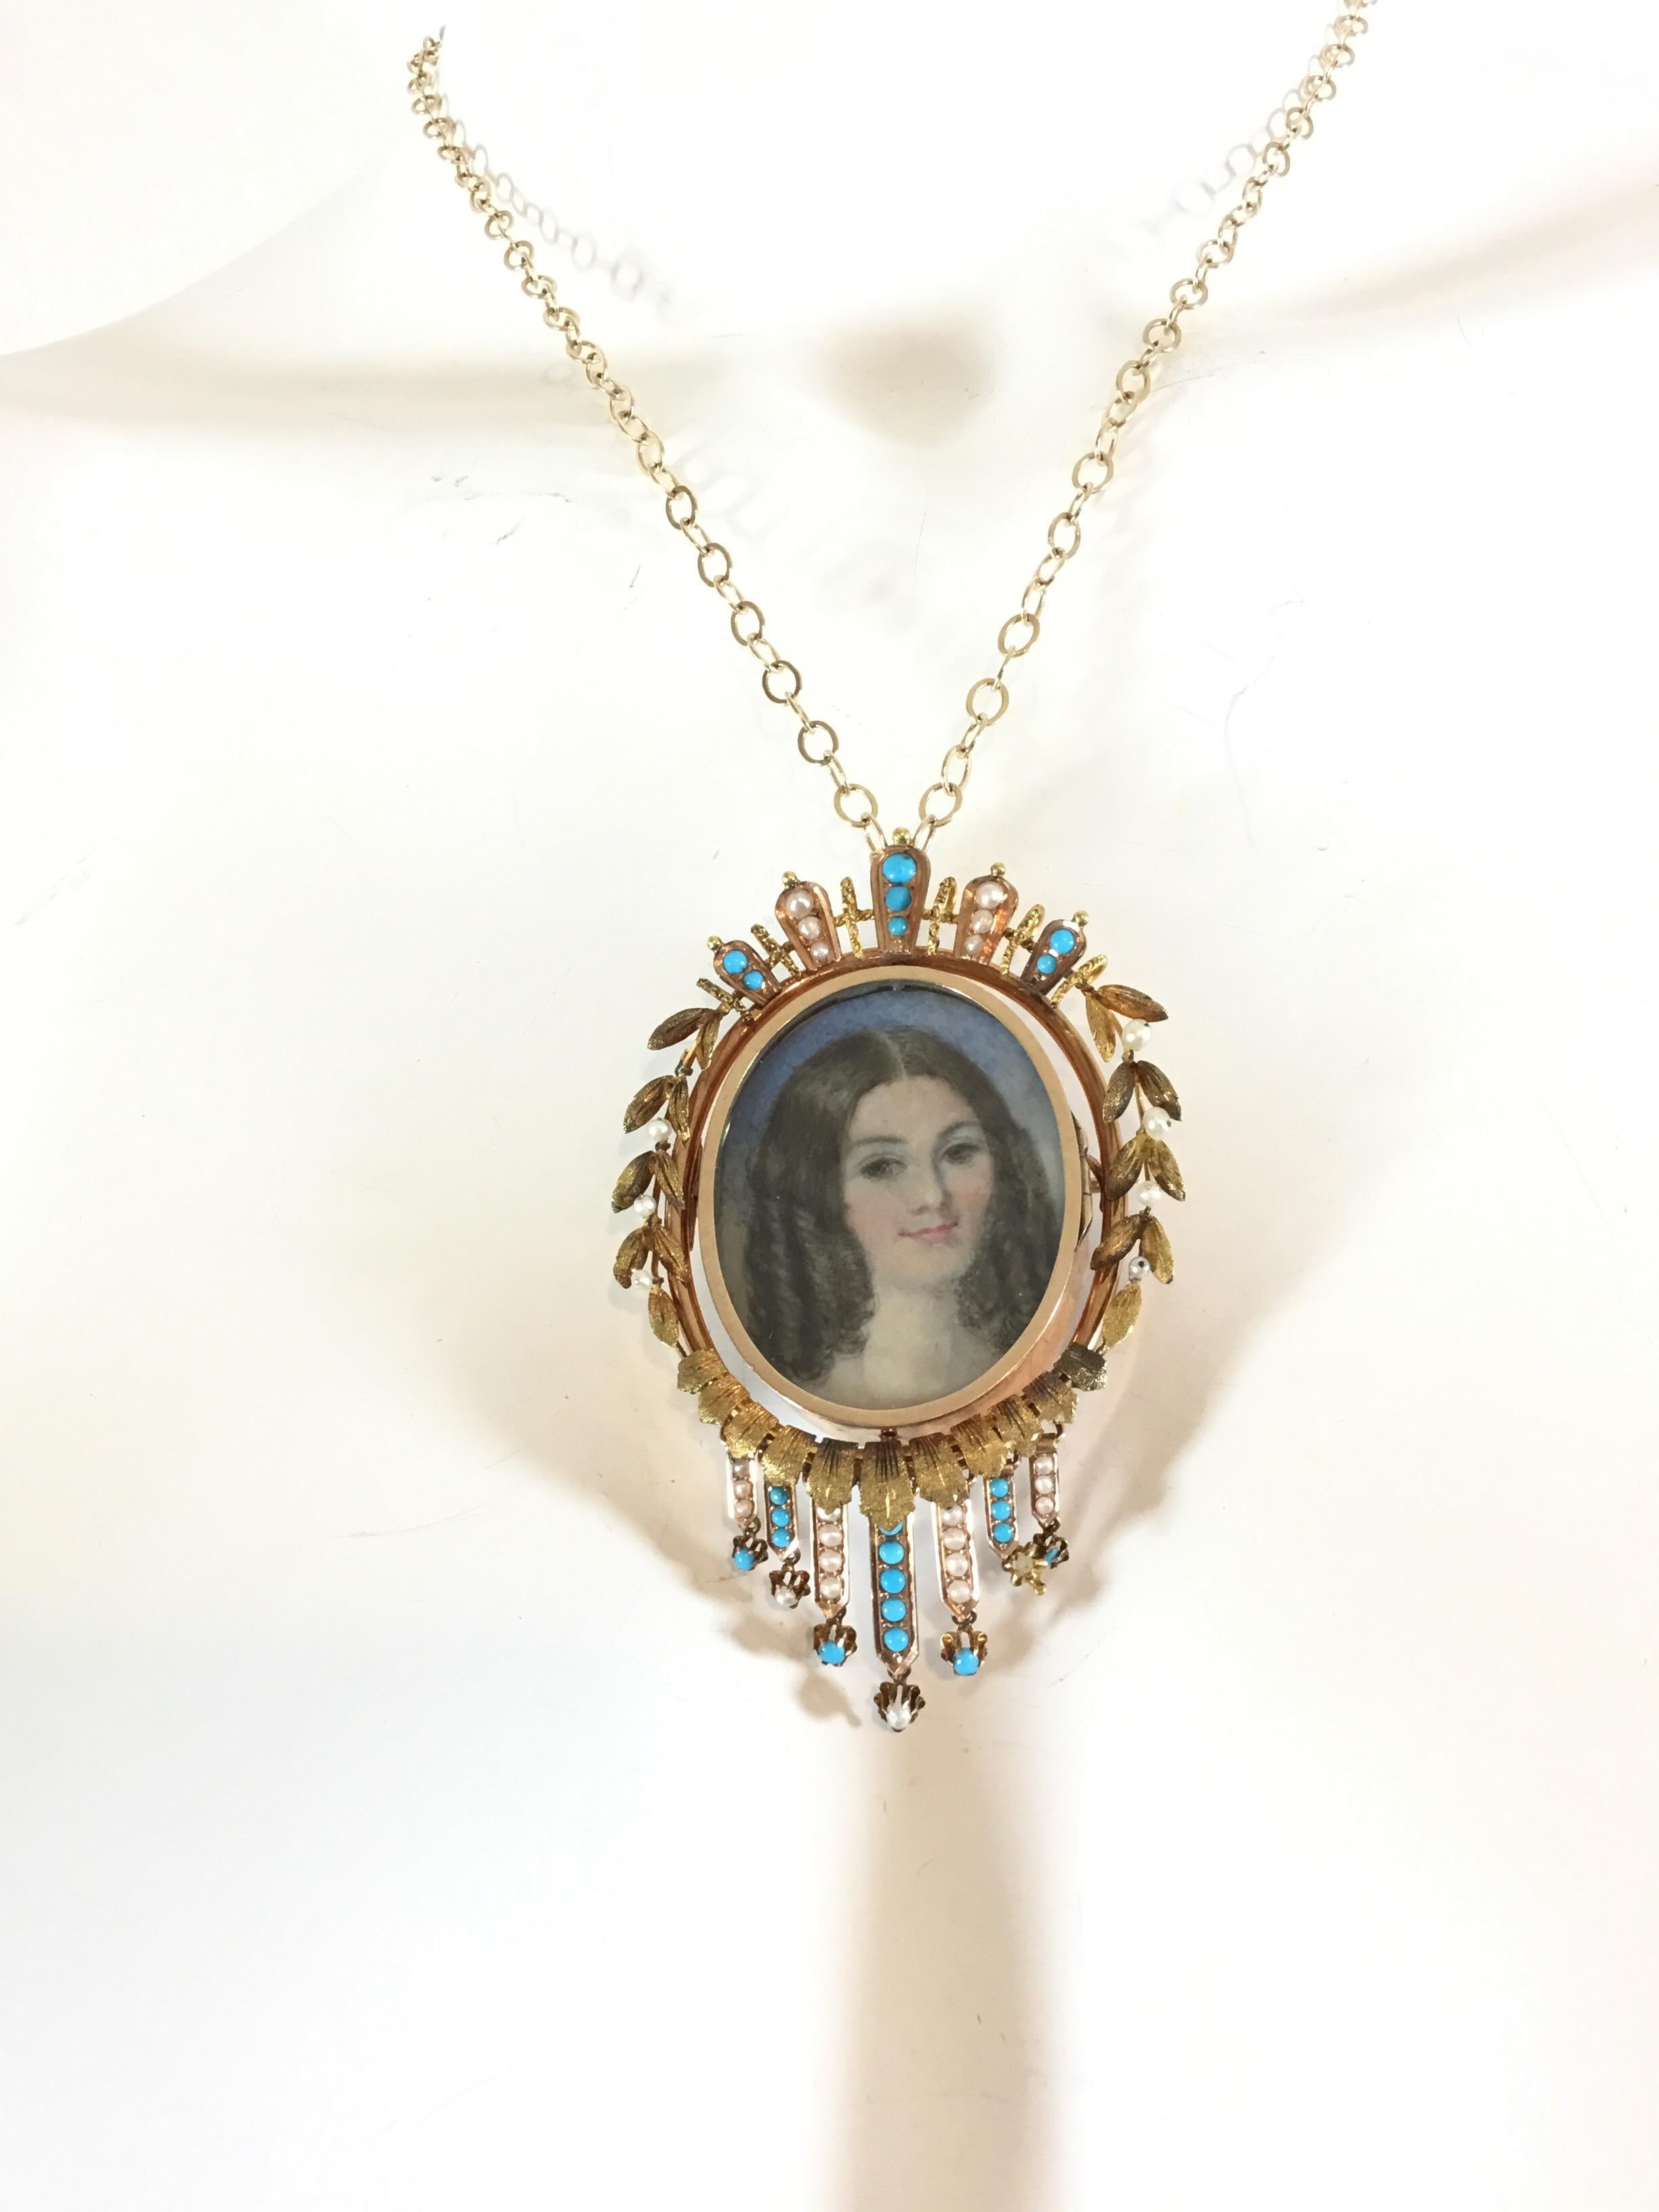 Late Victorian Victorian circa 1900's Hand Painted 2-Sided Pendant Necklace Brooch 14k Gold